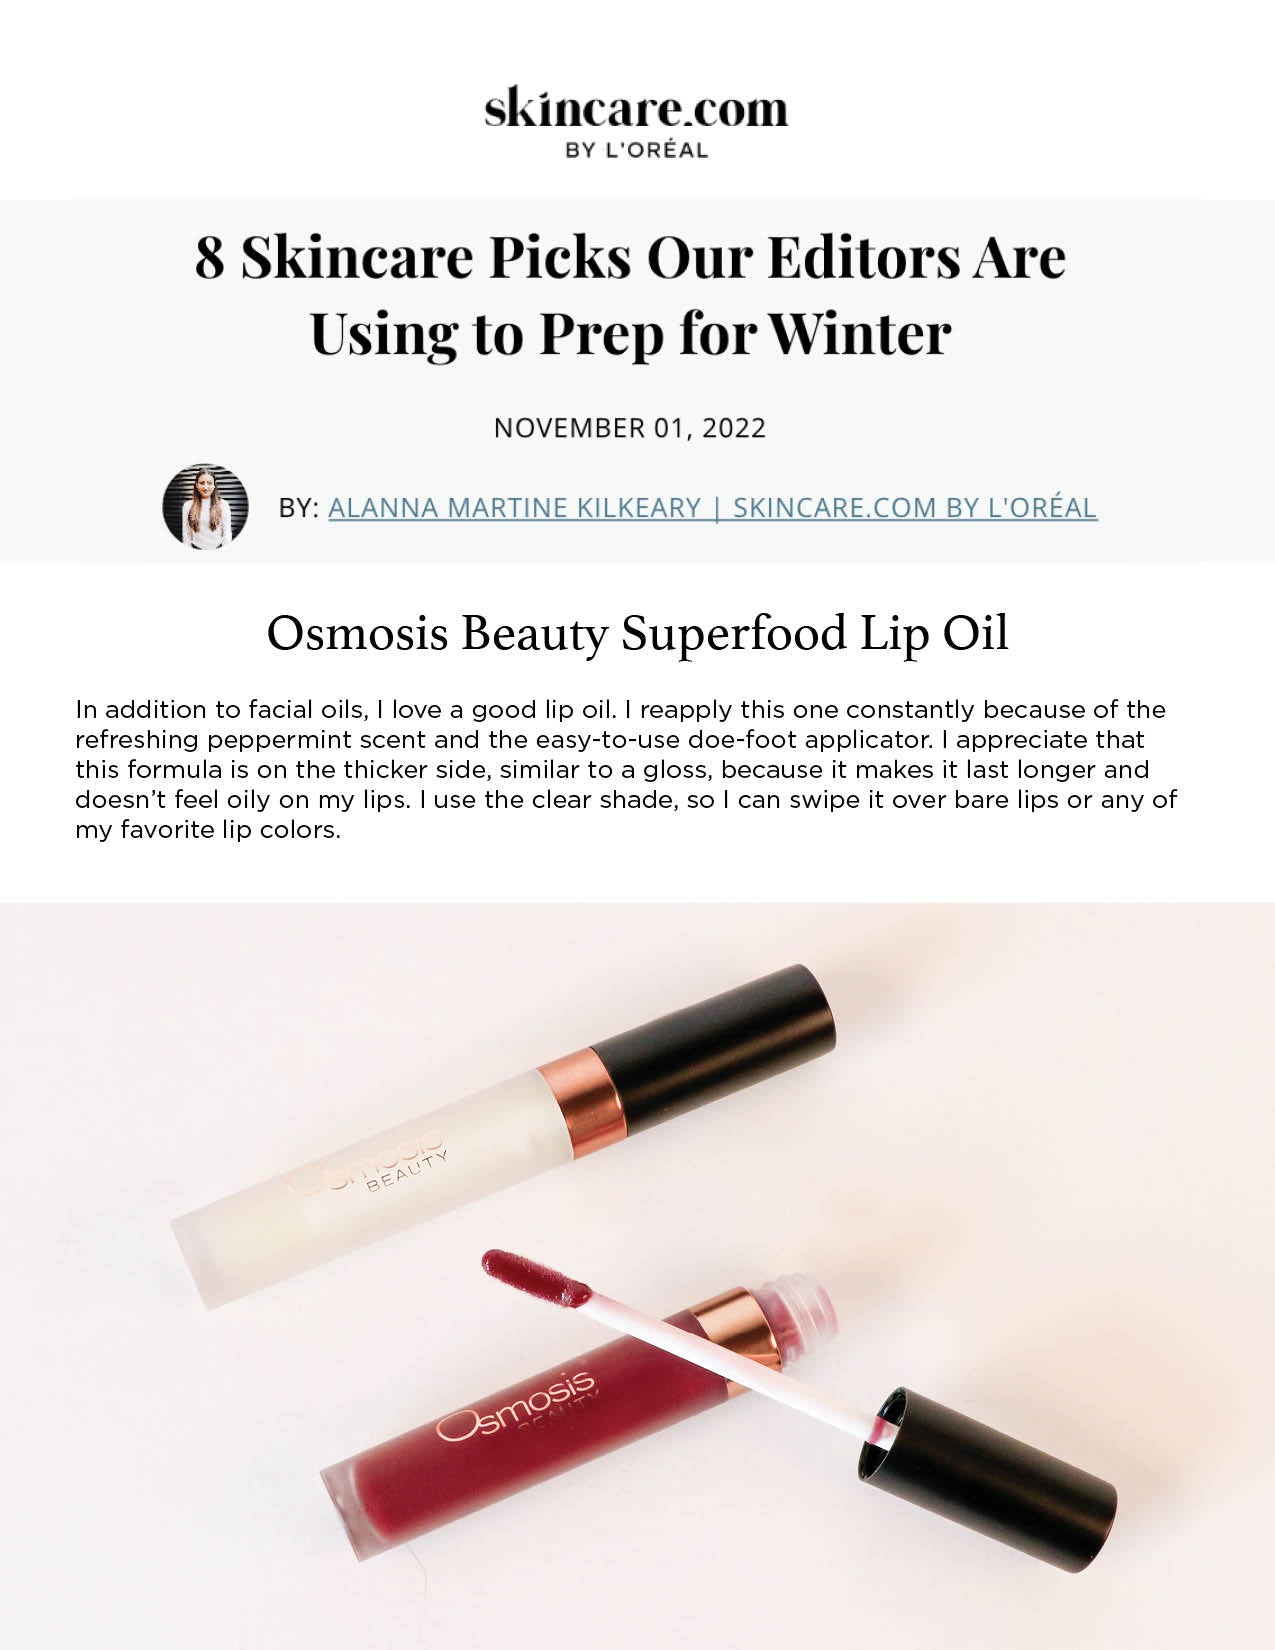 The Superfood Lip Oil was featured on Skincare.com in a story titled 8 Skincare Picks Our Editors Are Using to Prep for Winter